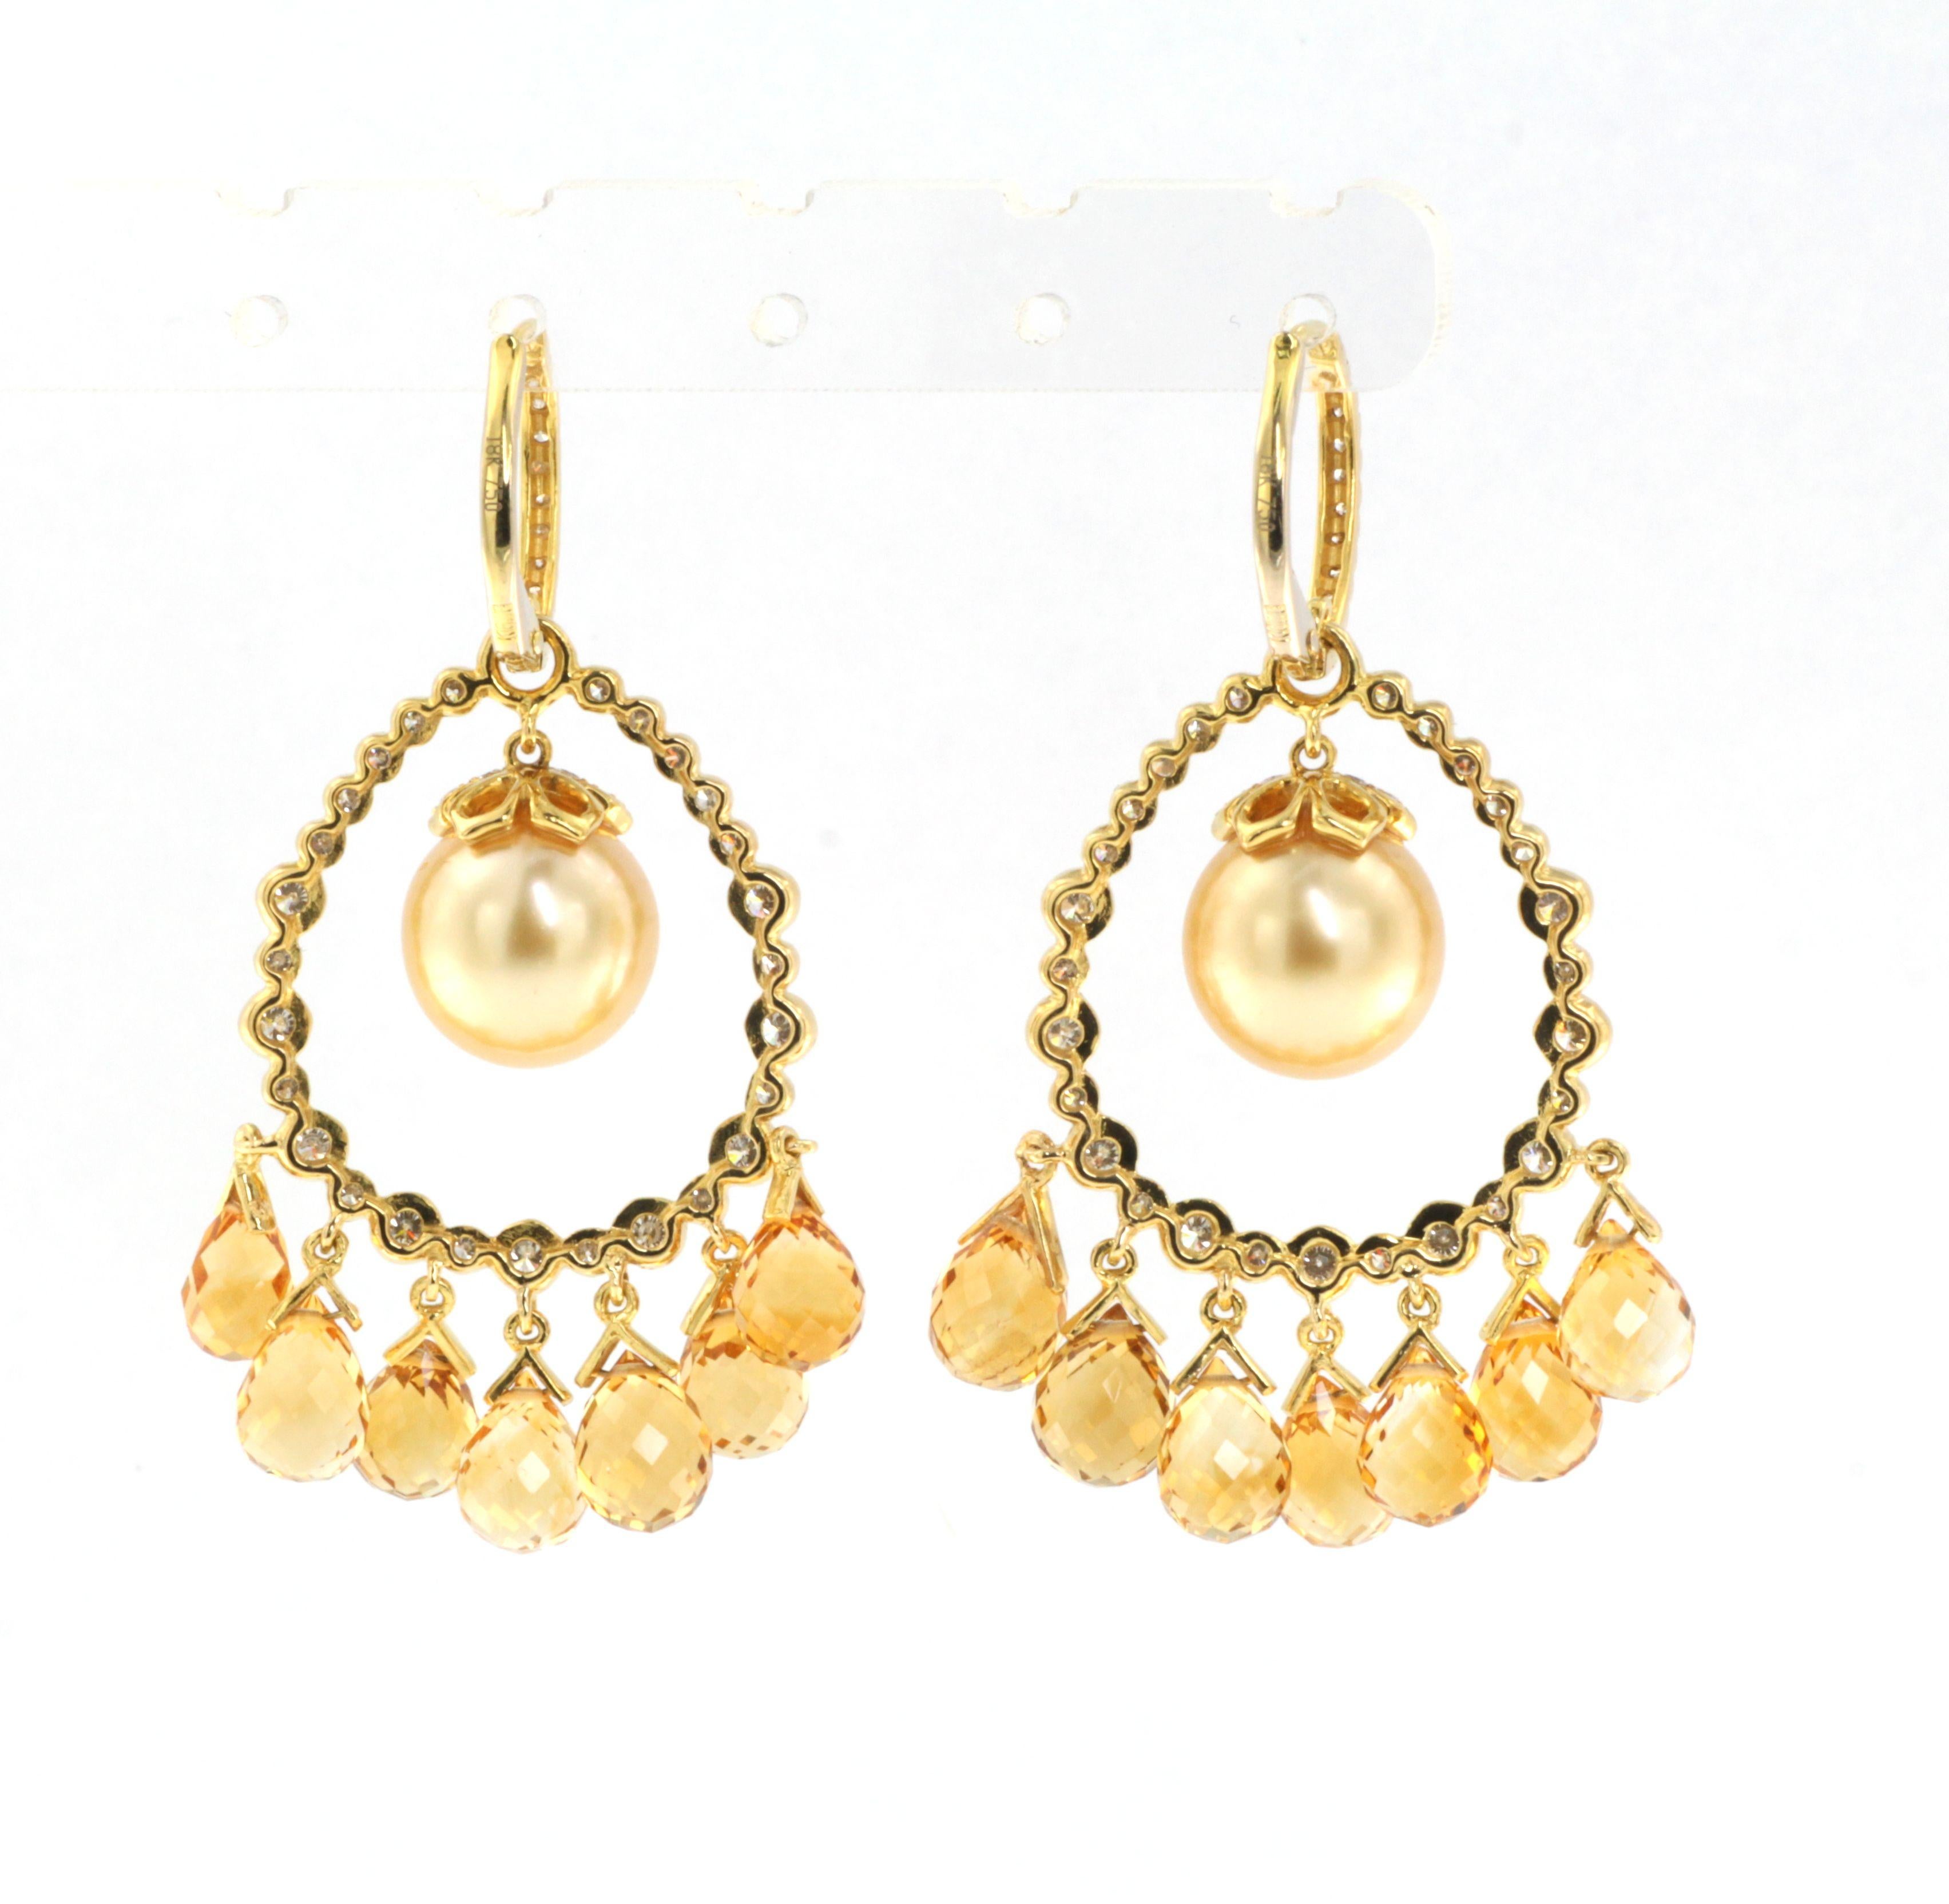 Introducing our Art Deco-inspired 18 karat yellow gold earrings, a luxurious and captivating piece of jewelry that exudes elegance and sophistication. The earrings feature a stunning 10mm goiden color south sea pearl at the center, surrounded by a